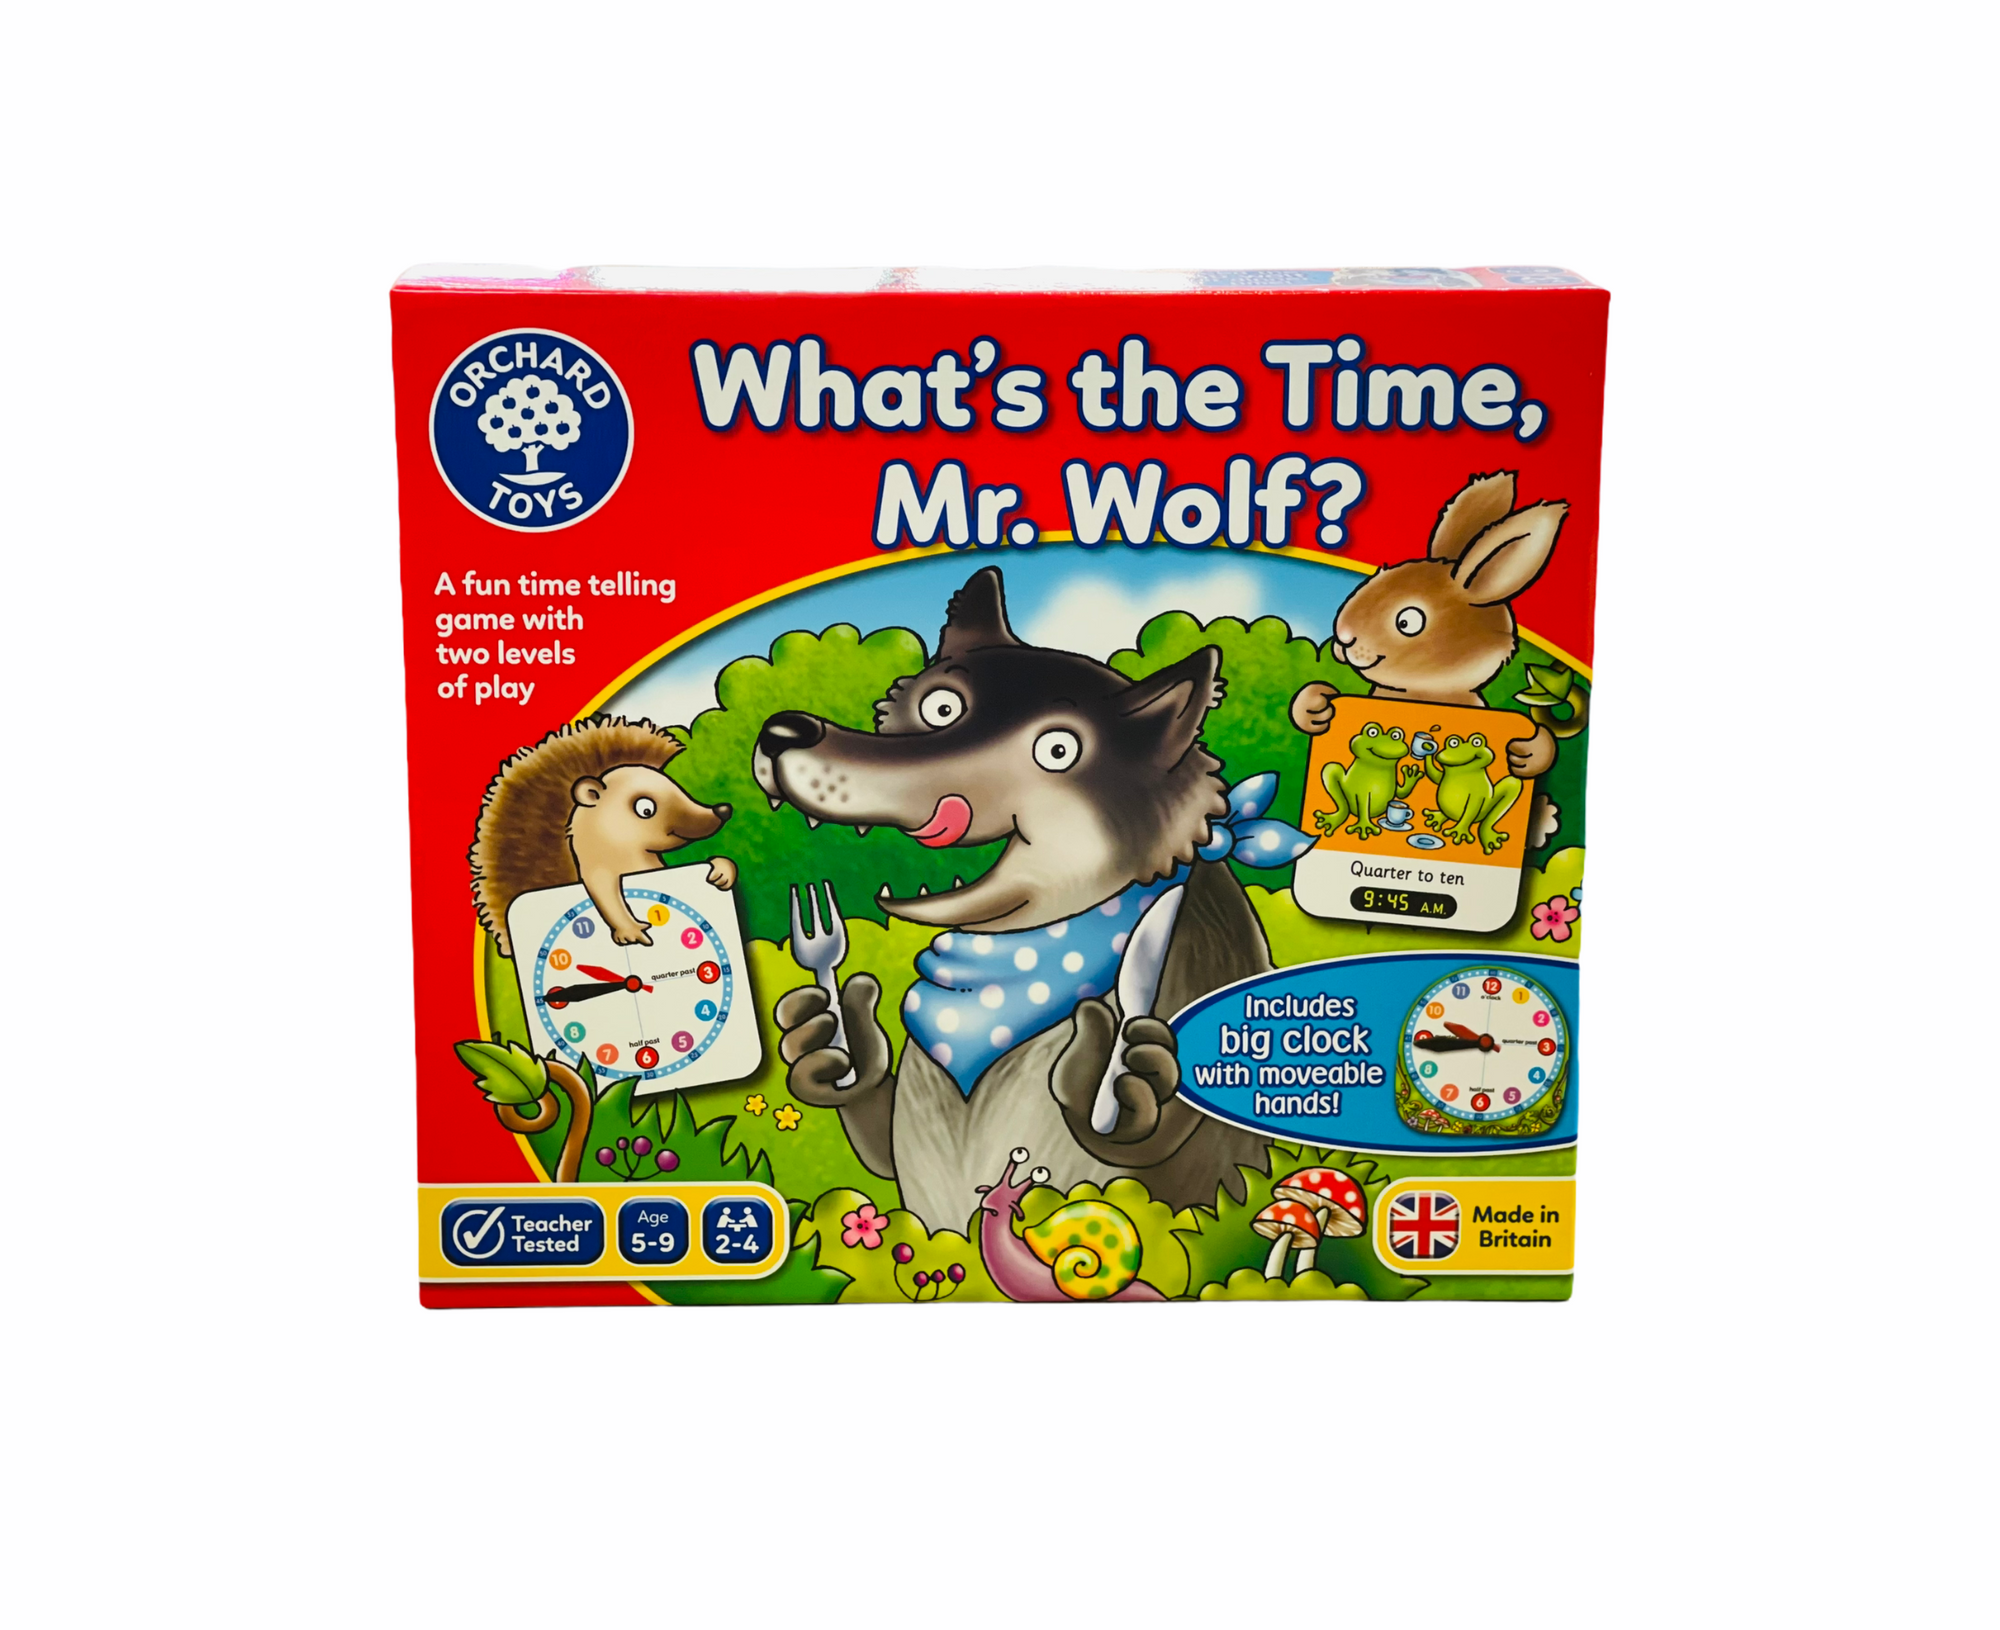 Orchard Whats the Time Mr Wolf? packaging box showing wolf holding knife and fork